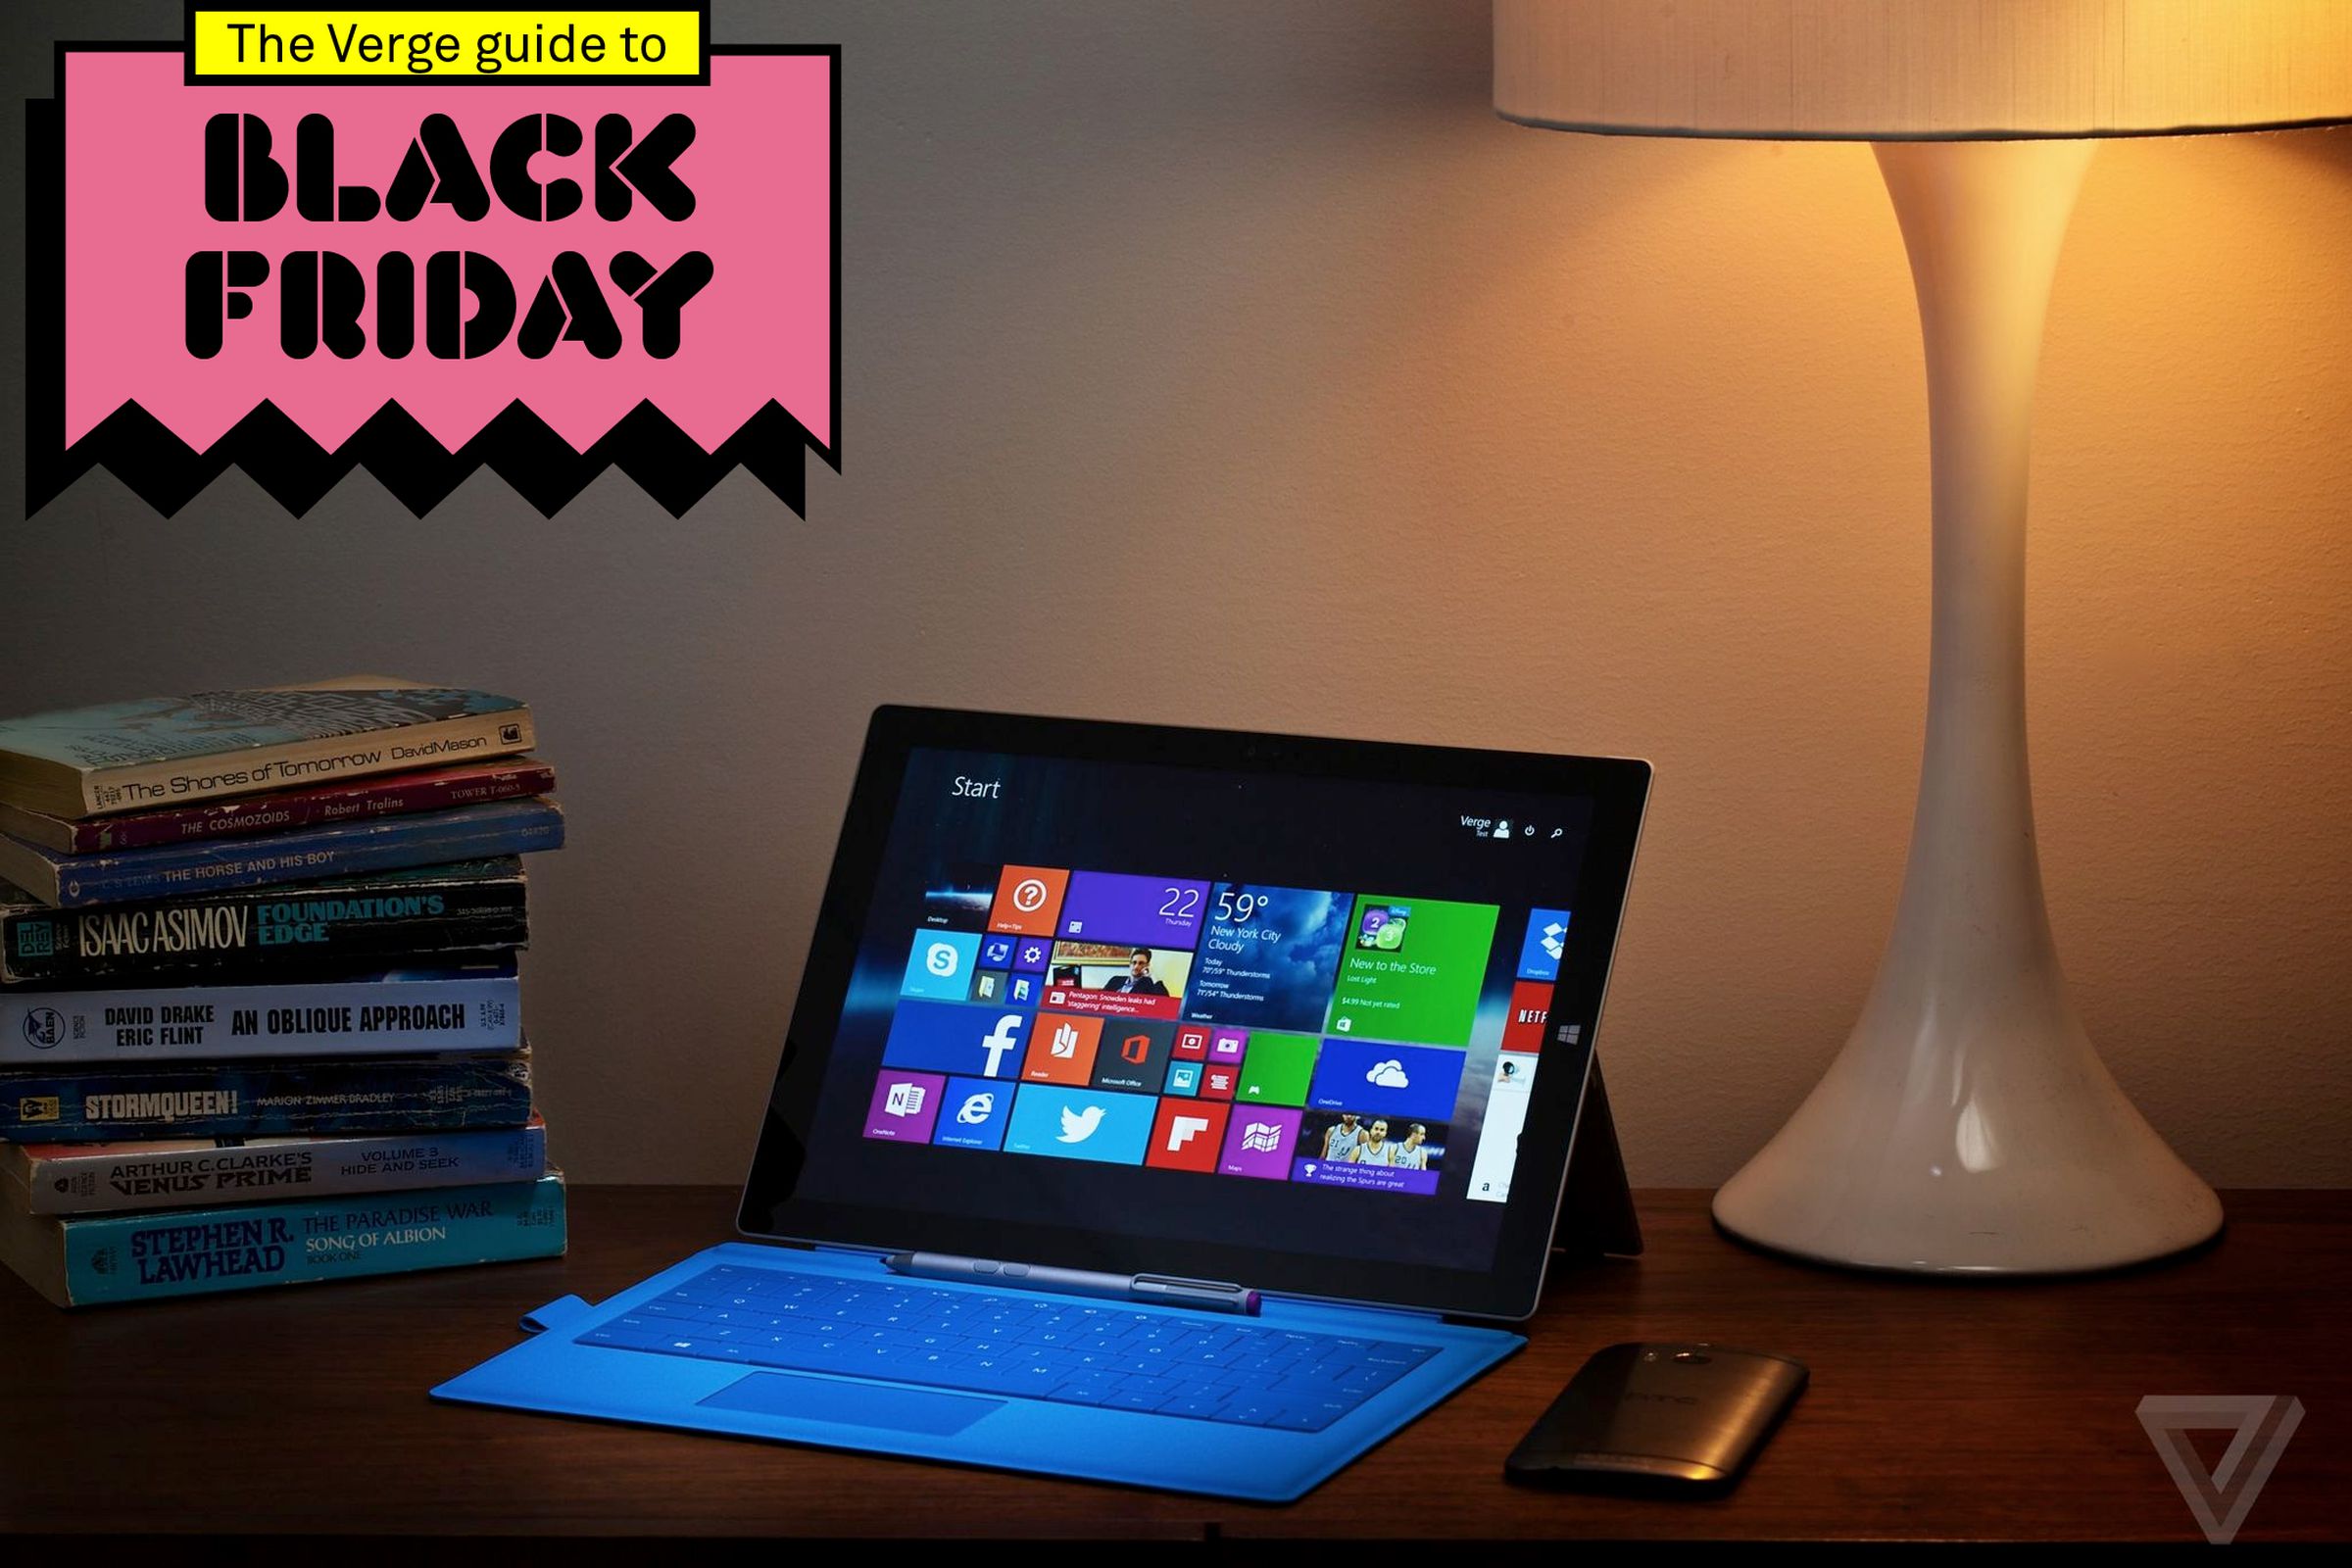 Costco's Black Friday deals include discounts on TVs and Surface Pro 3